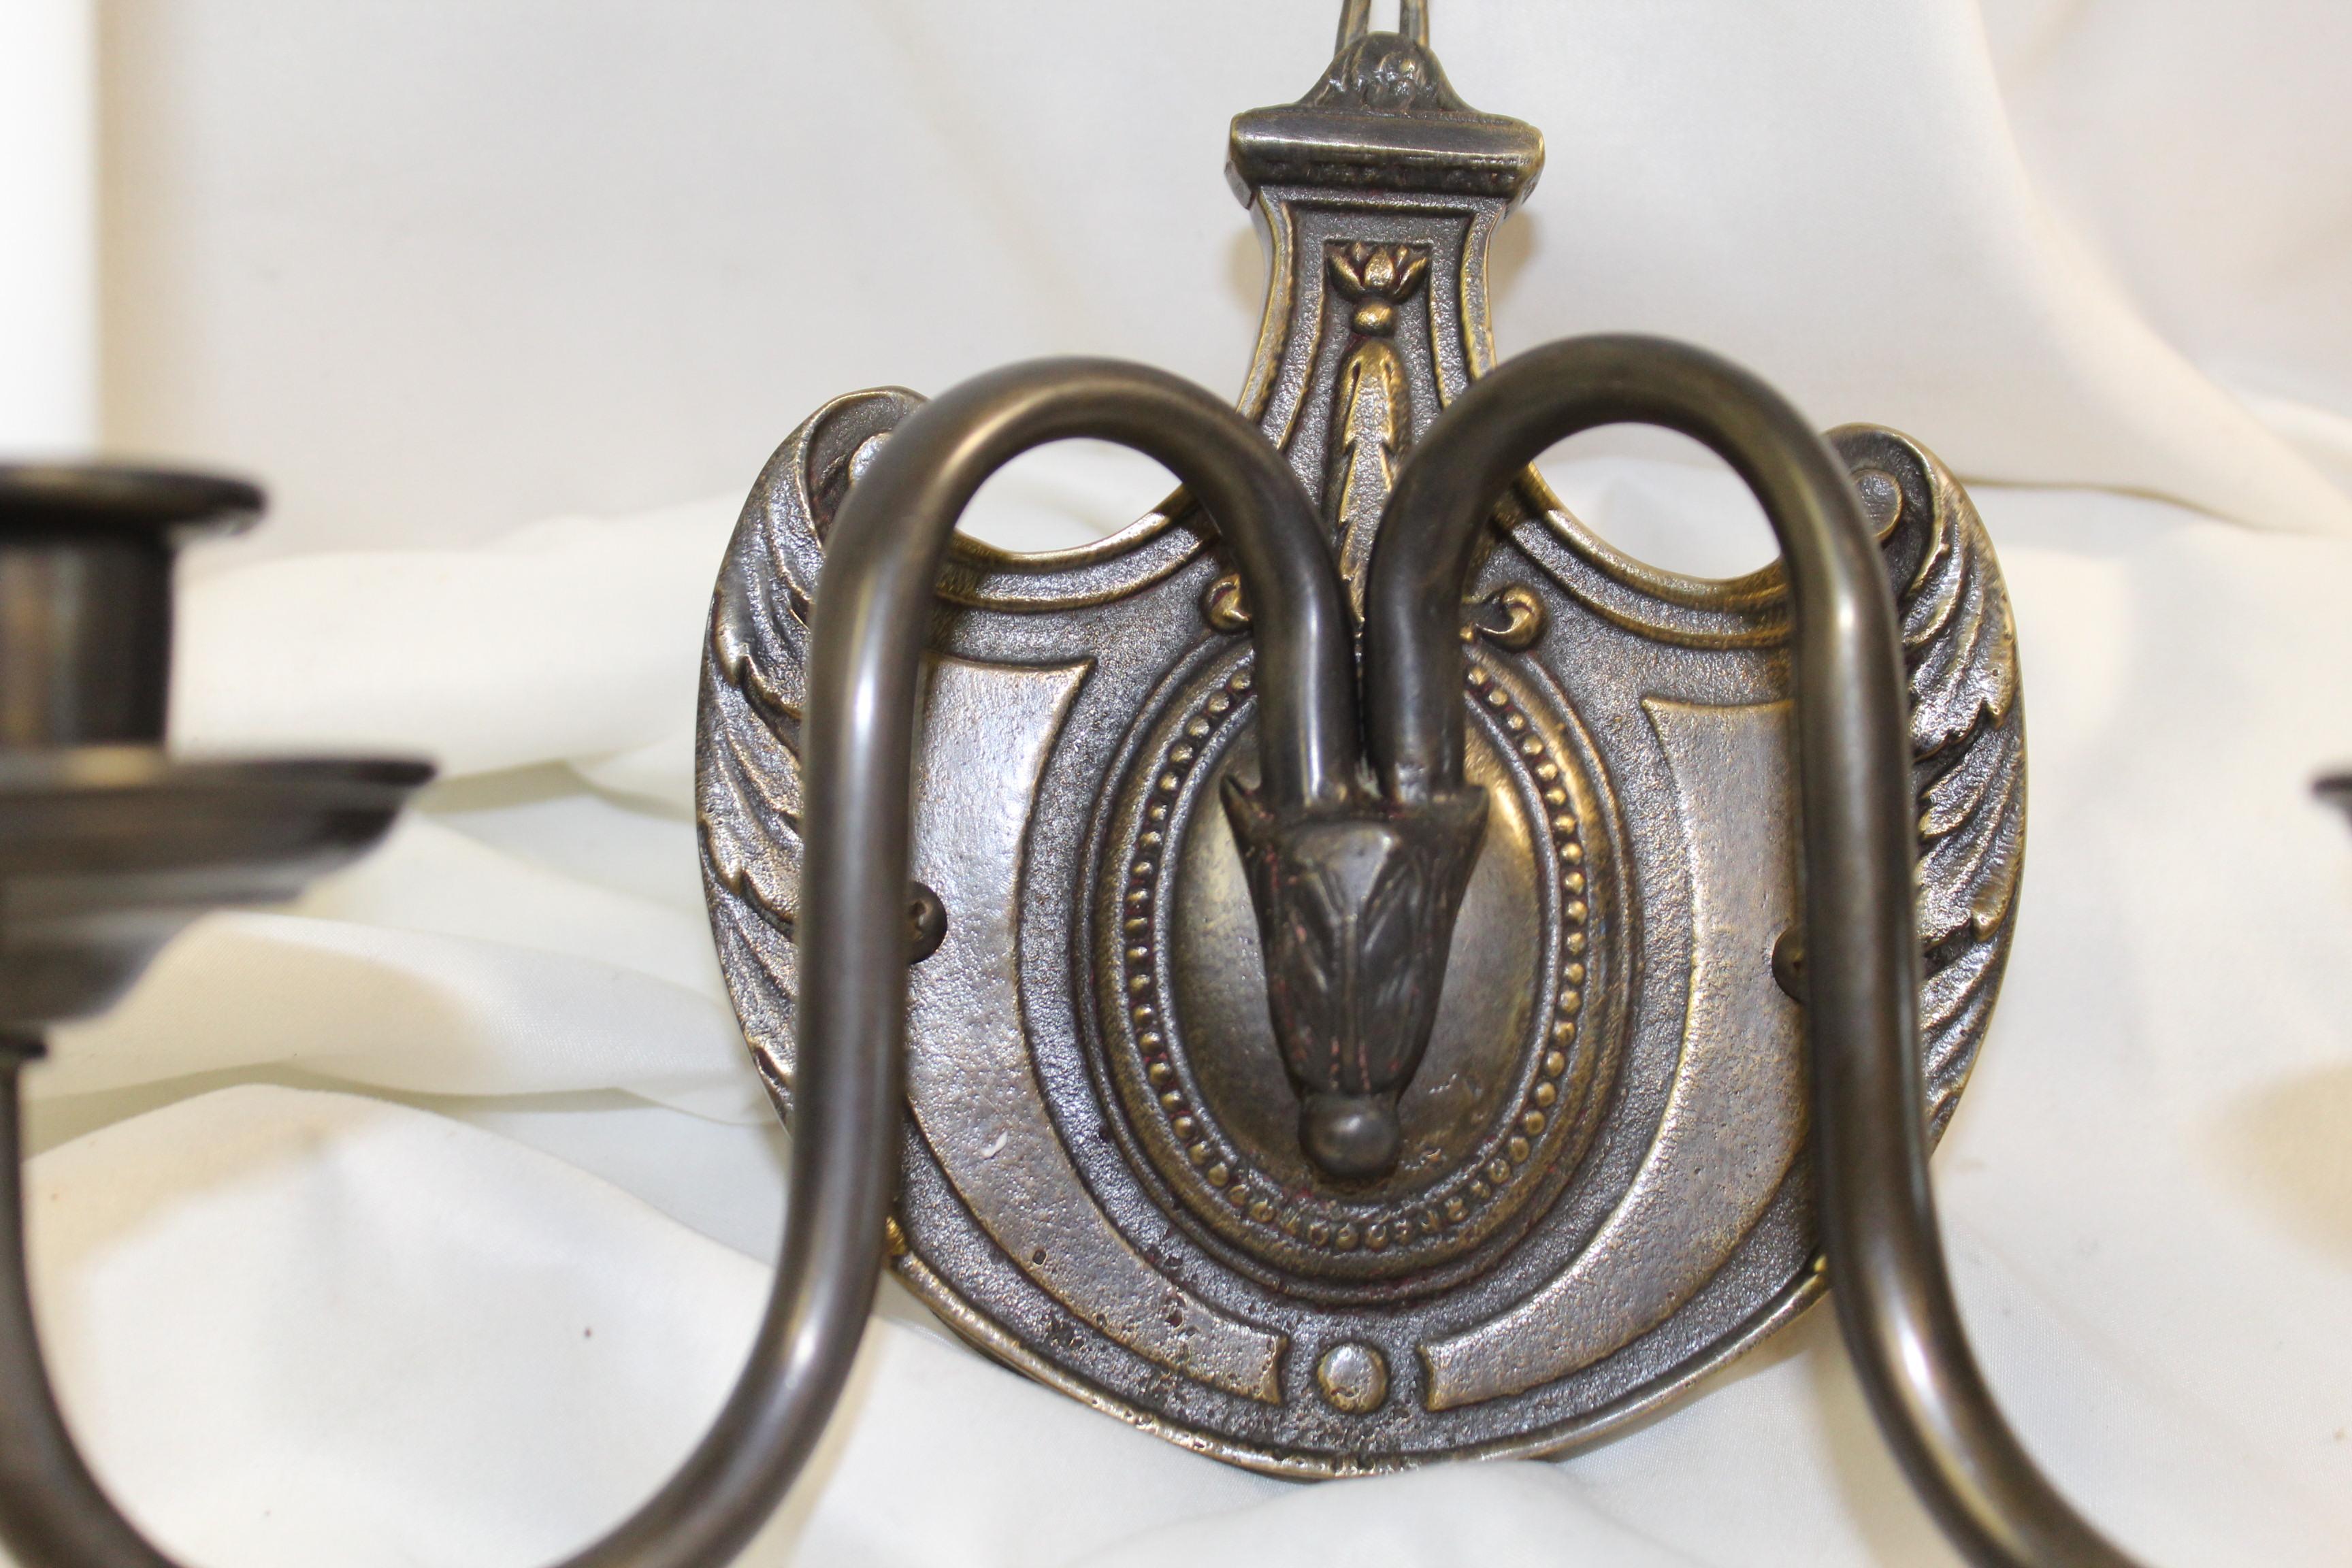 A great design of American or possibly English Sconces . All quality work and finished in a dark patina finish . Two arms with candelabra sockets and 3